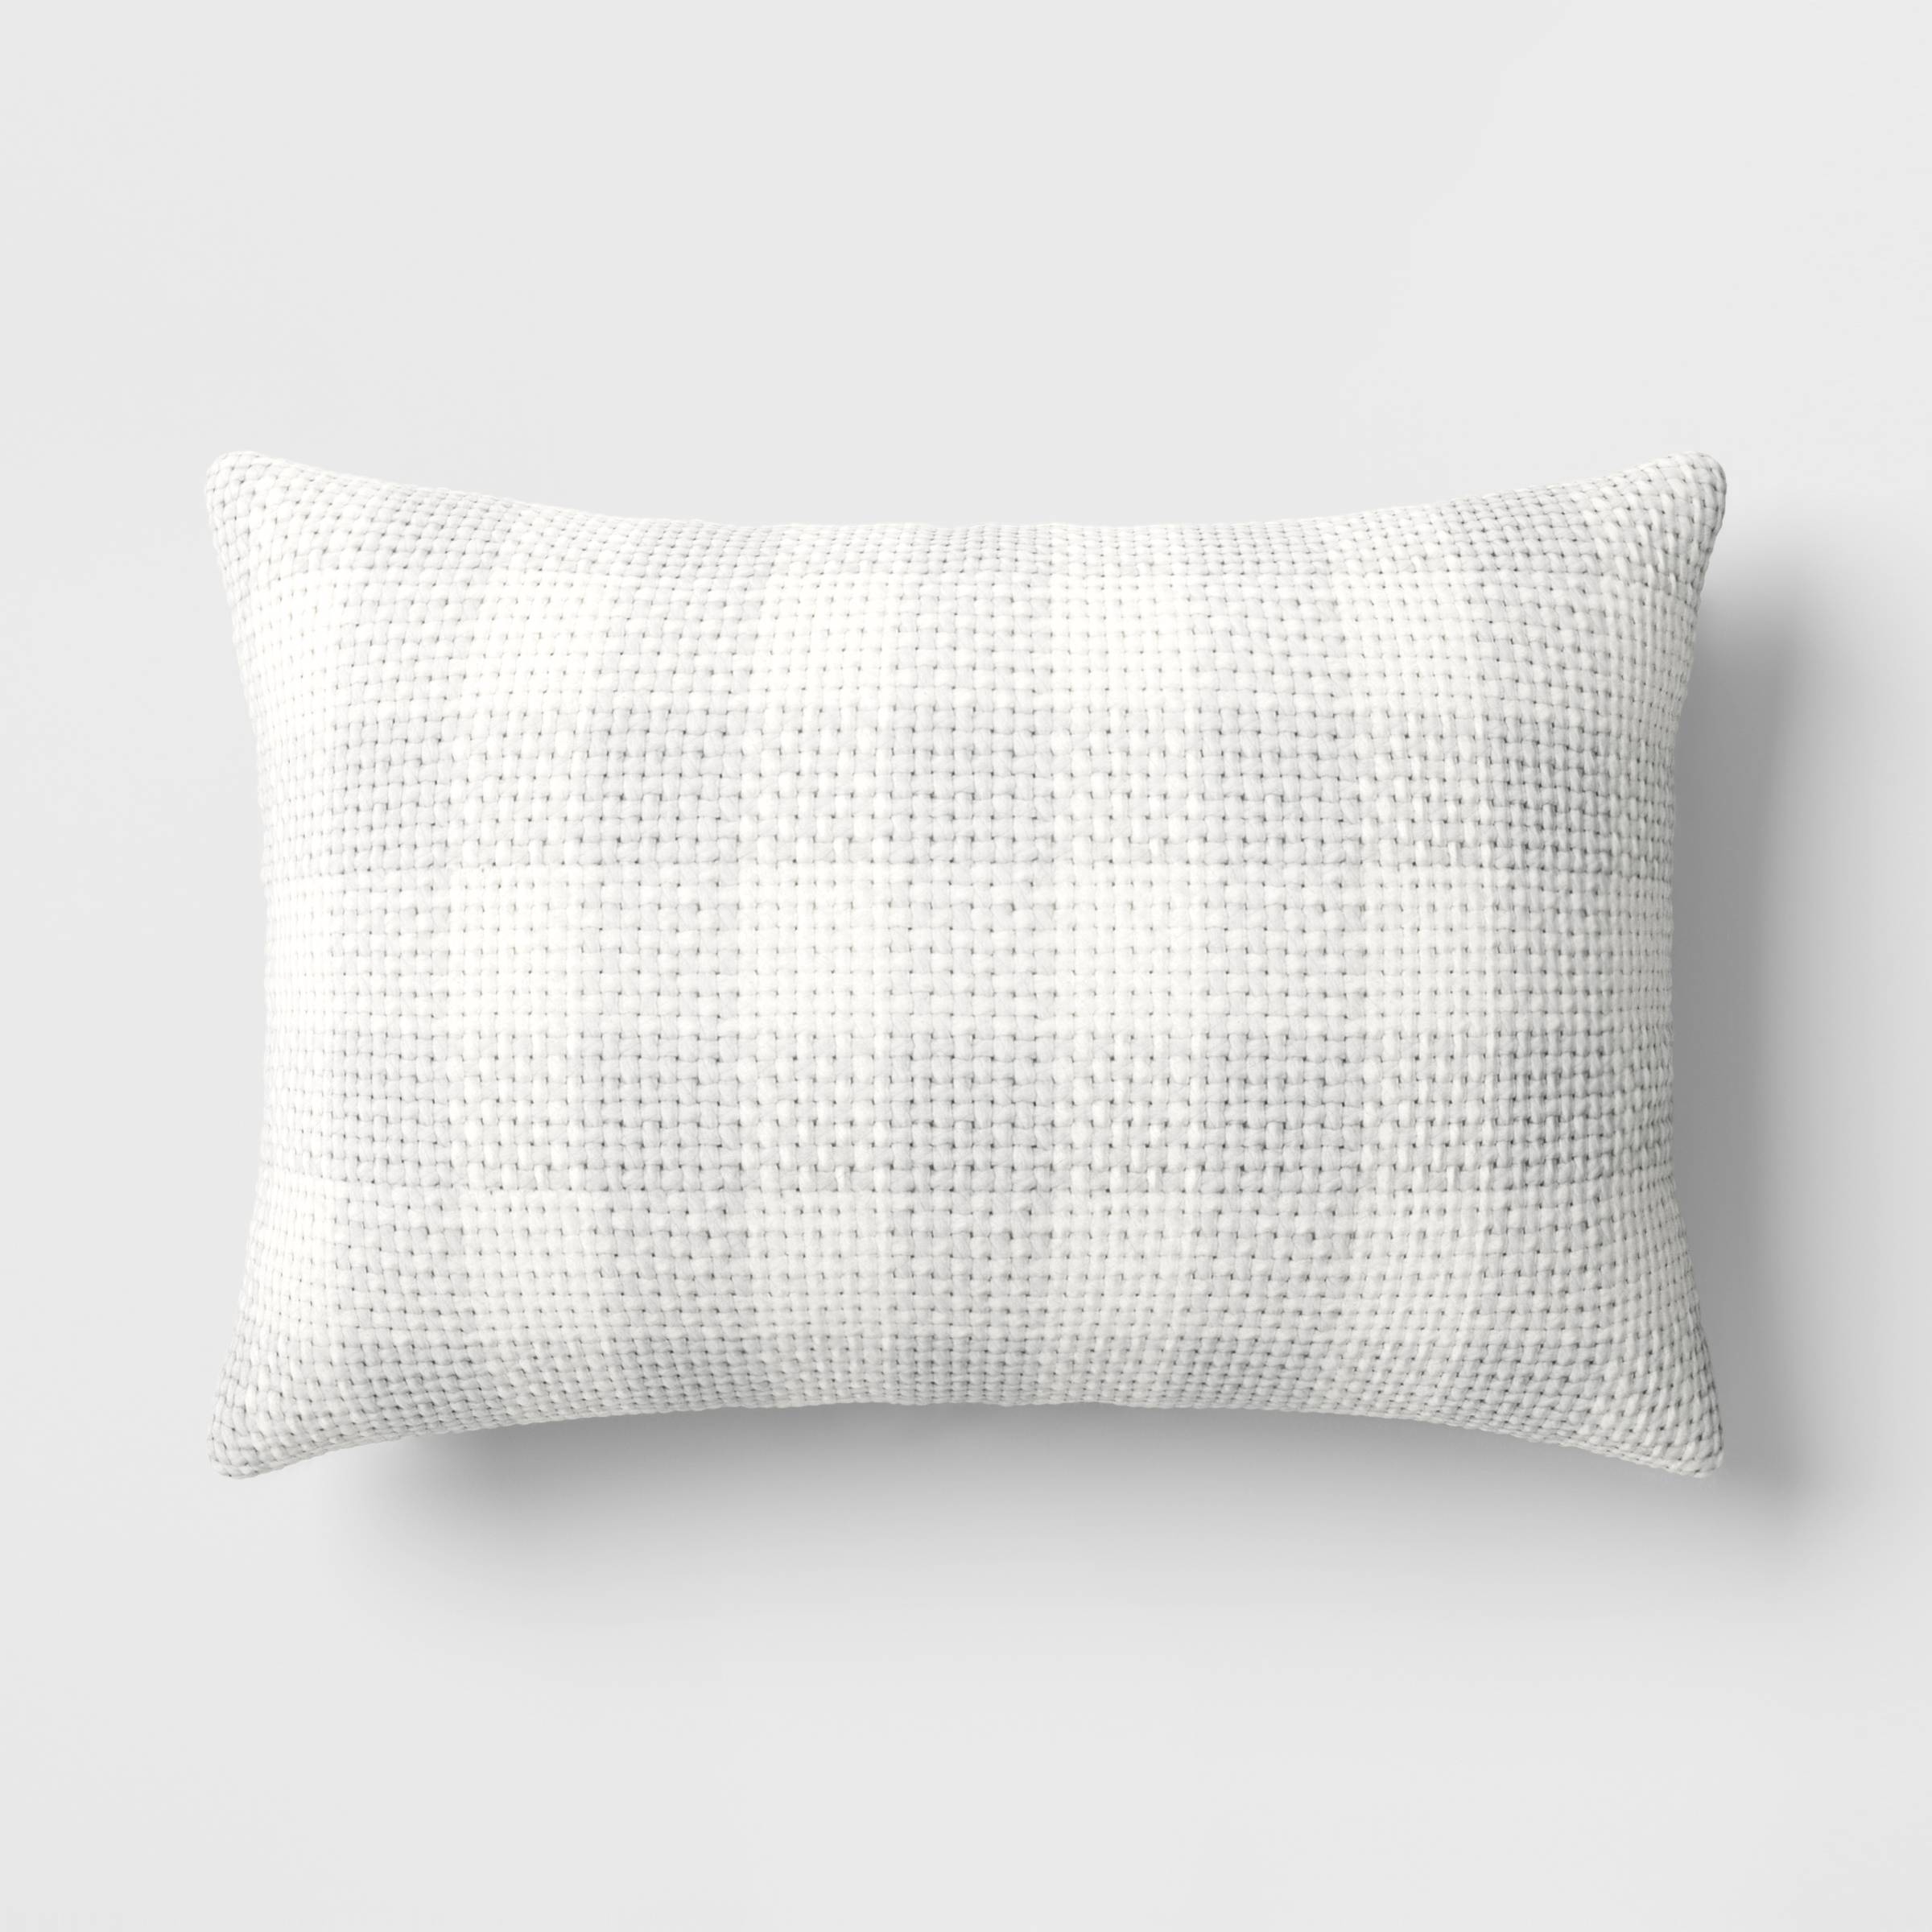 A white textured pillow on a solid background